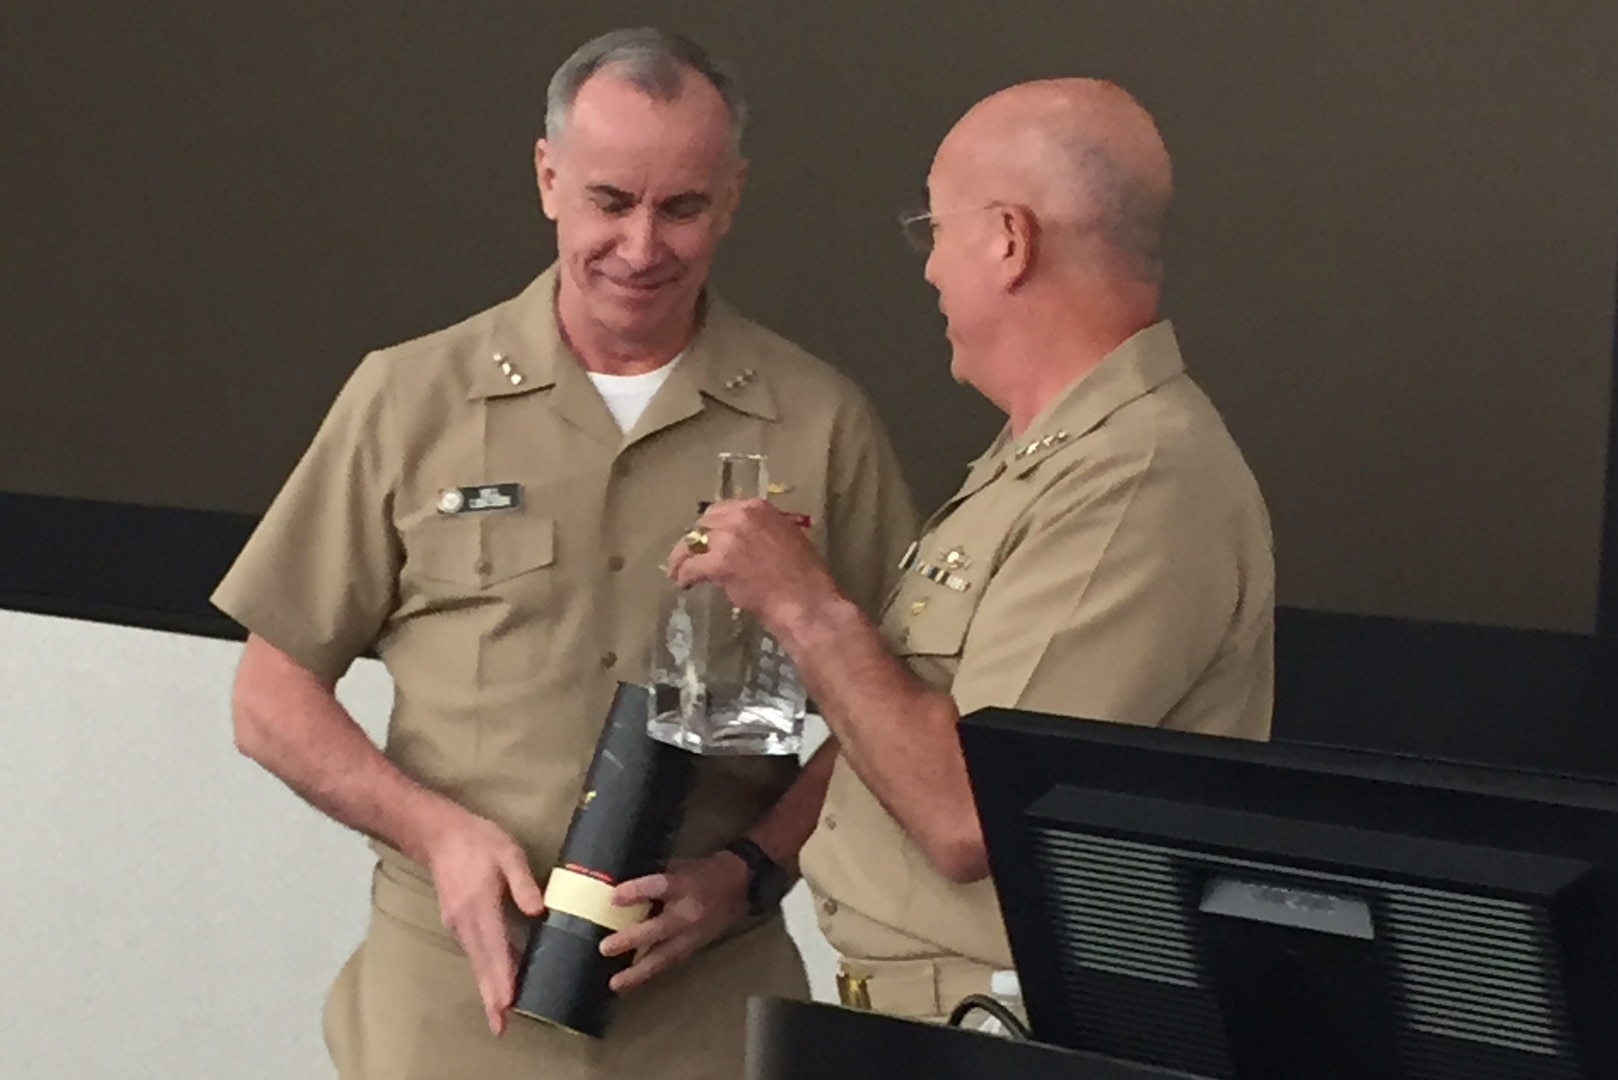 Navy Adm. Kurt Tidd passes the Old Goat Award decanter to Vice Adm. Bill Lesher during an unofficial ceremony at the Washington Navy Yard.